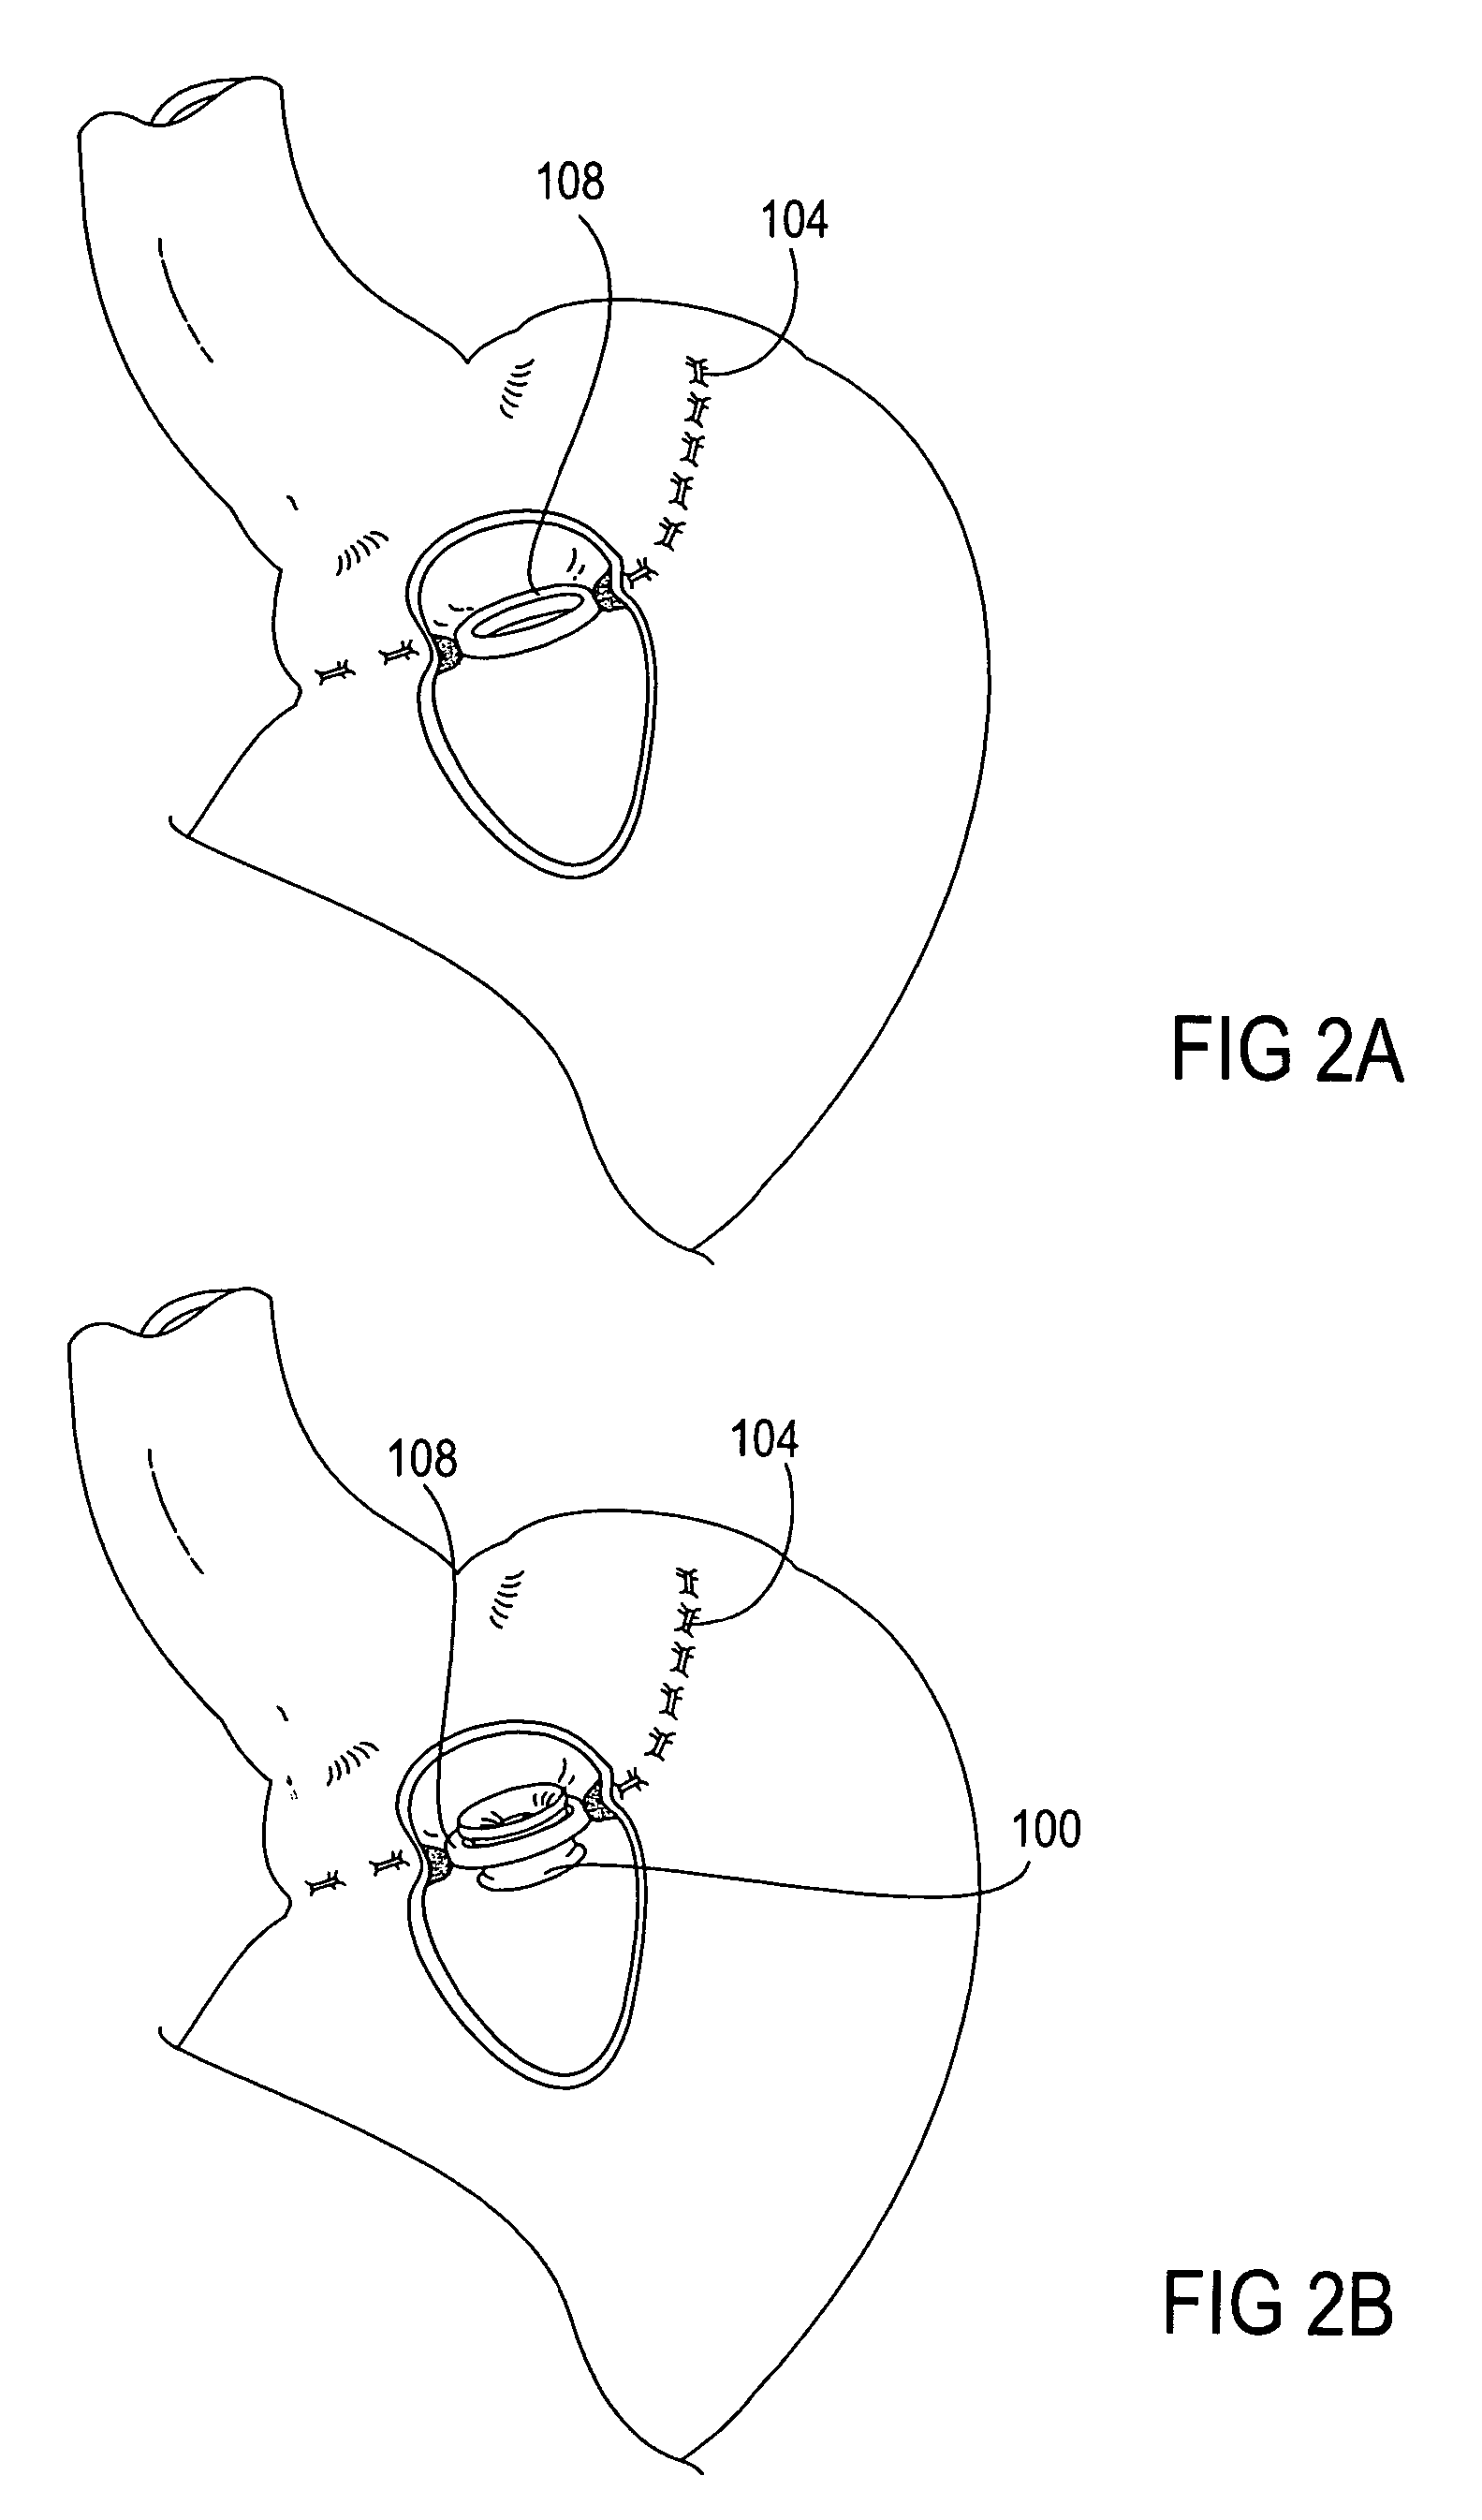 Apparatus and methods for treatment of morbid obesity